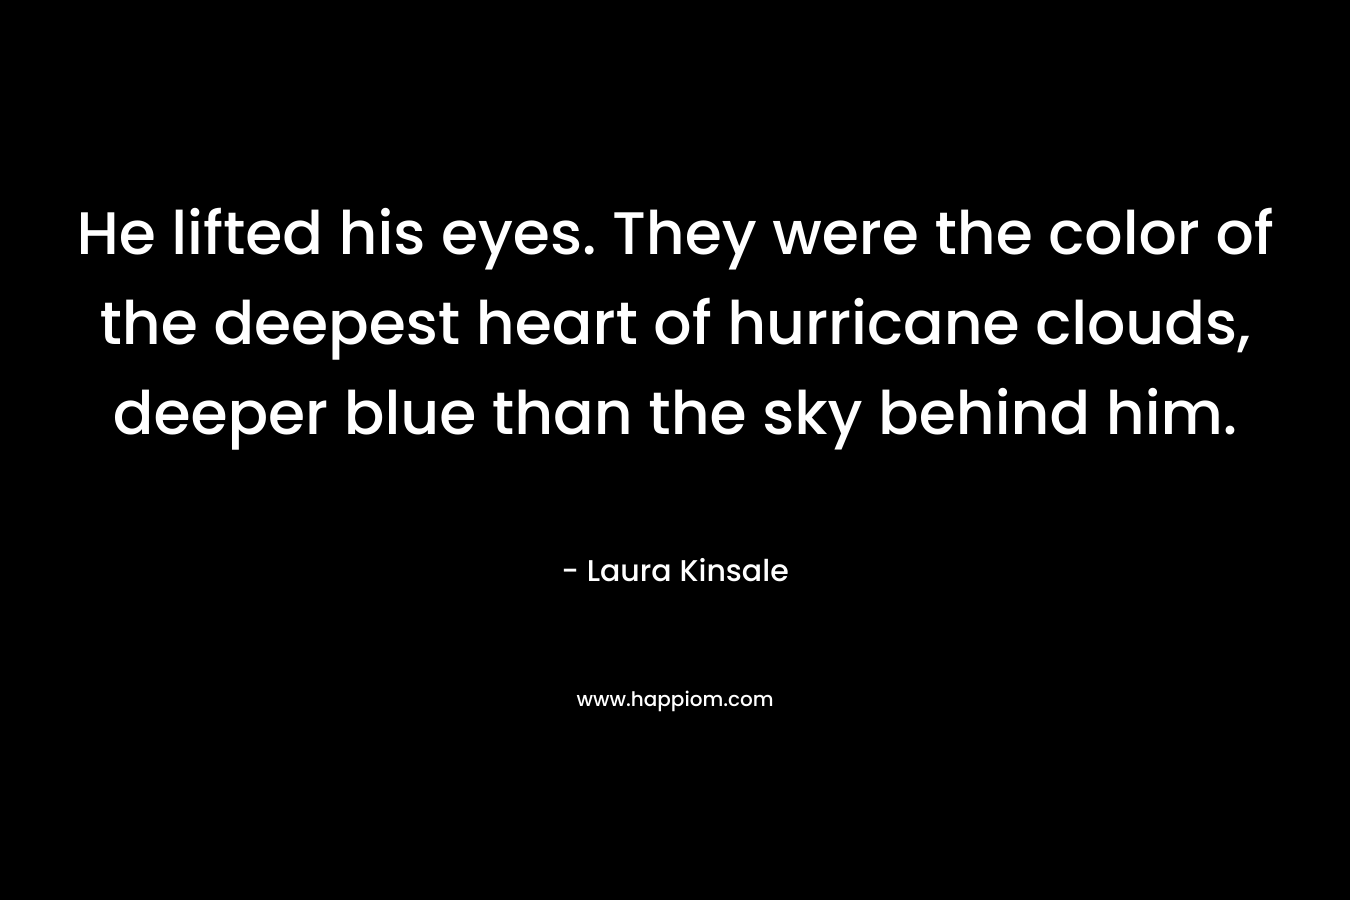 He lifted his eyes. They were the color of the deepest heart of hurricane clouds, deeper blue than the sky behind him.